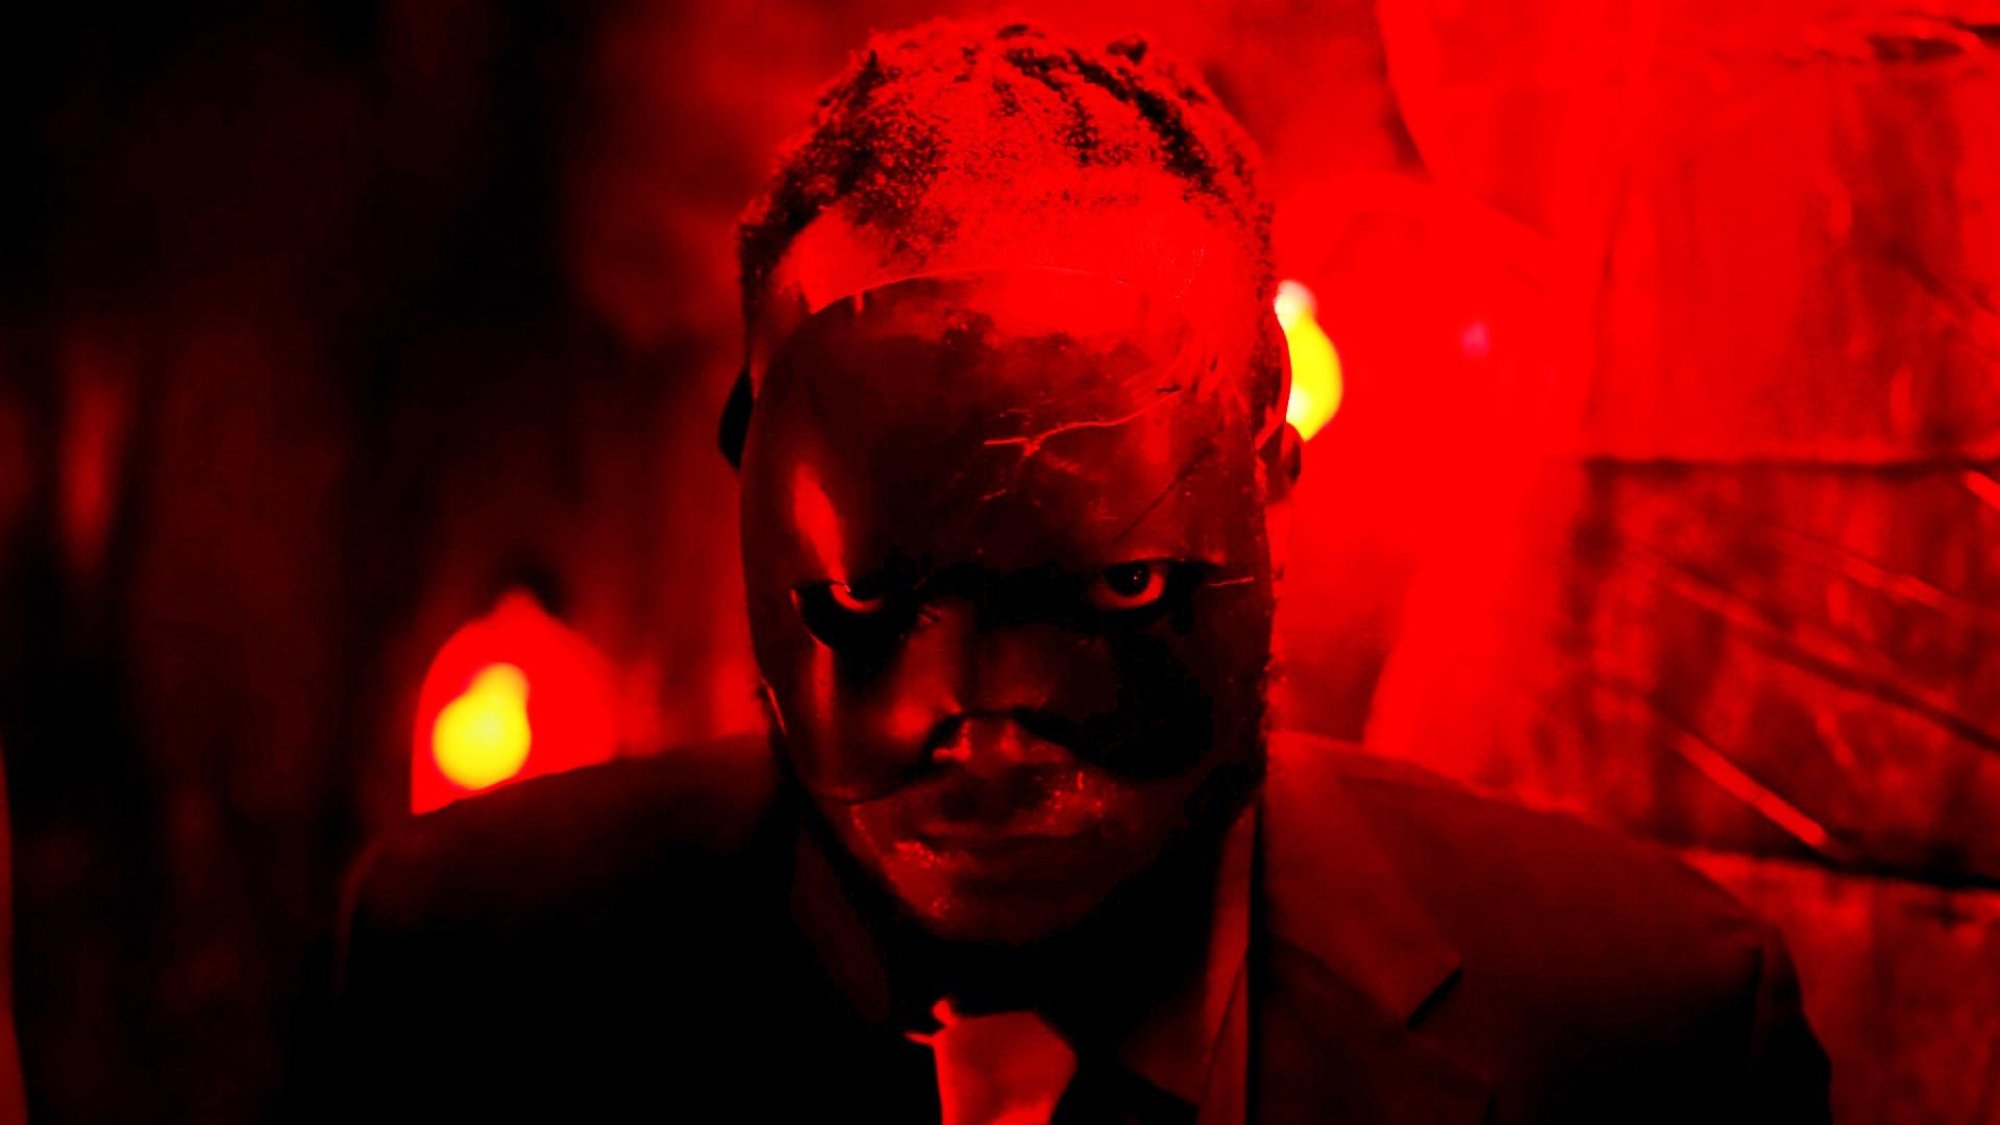 'Bitch Ass' Tunde Laleye as Bitch Ass wearing a black mask looking at the camera